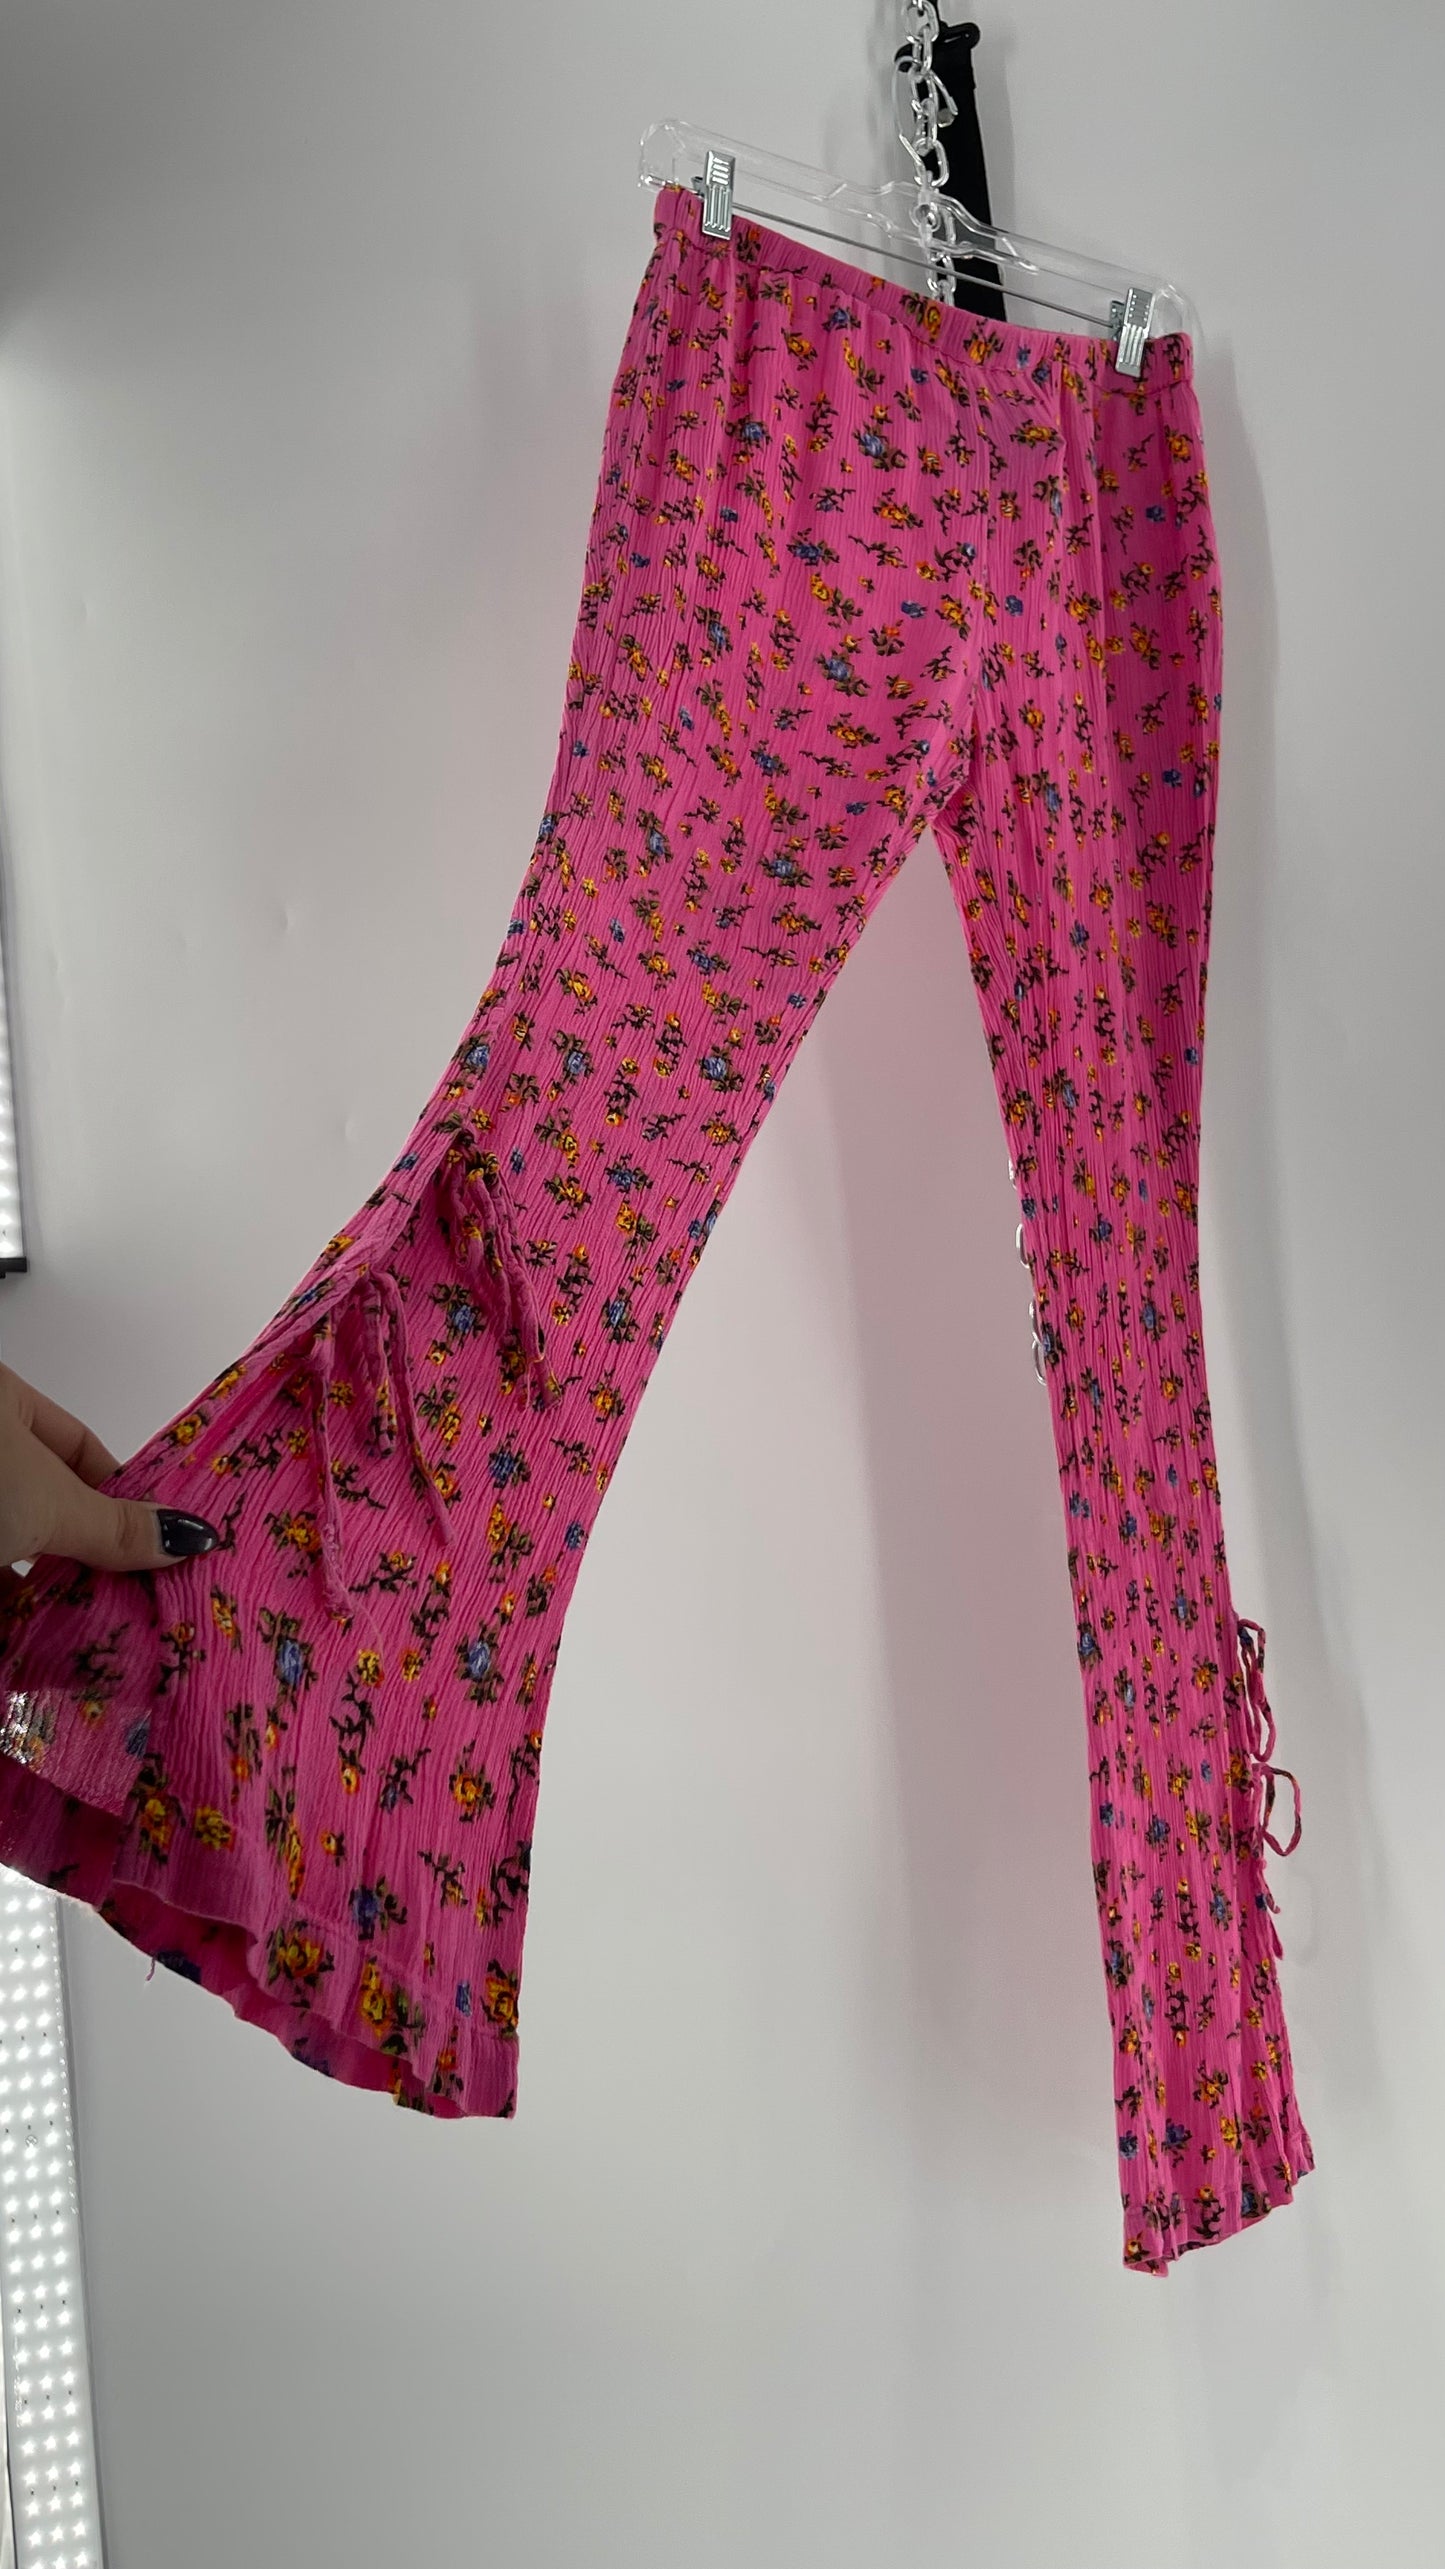 Urban Outfitters Crimped Floral Flares with Tie Up Ankle Detailing (Small)